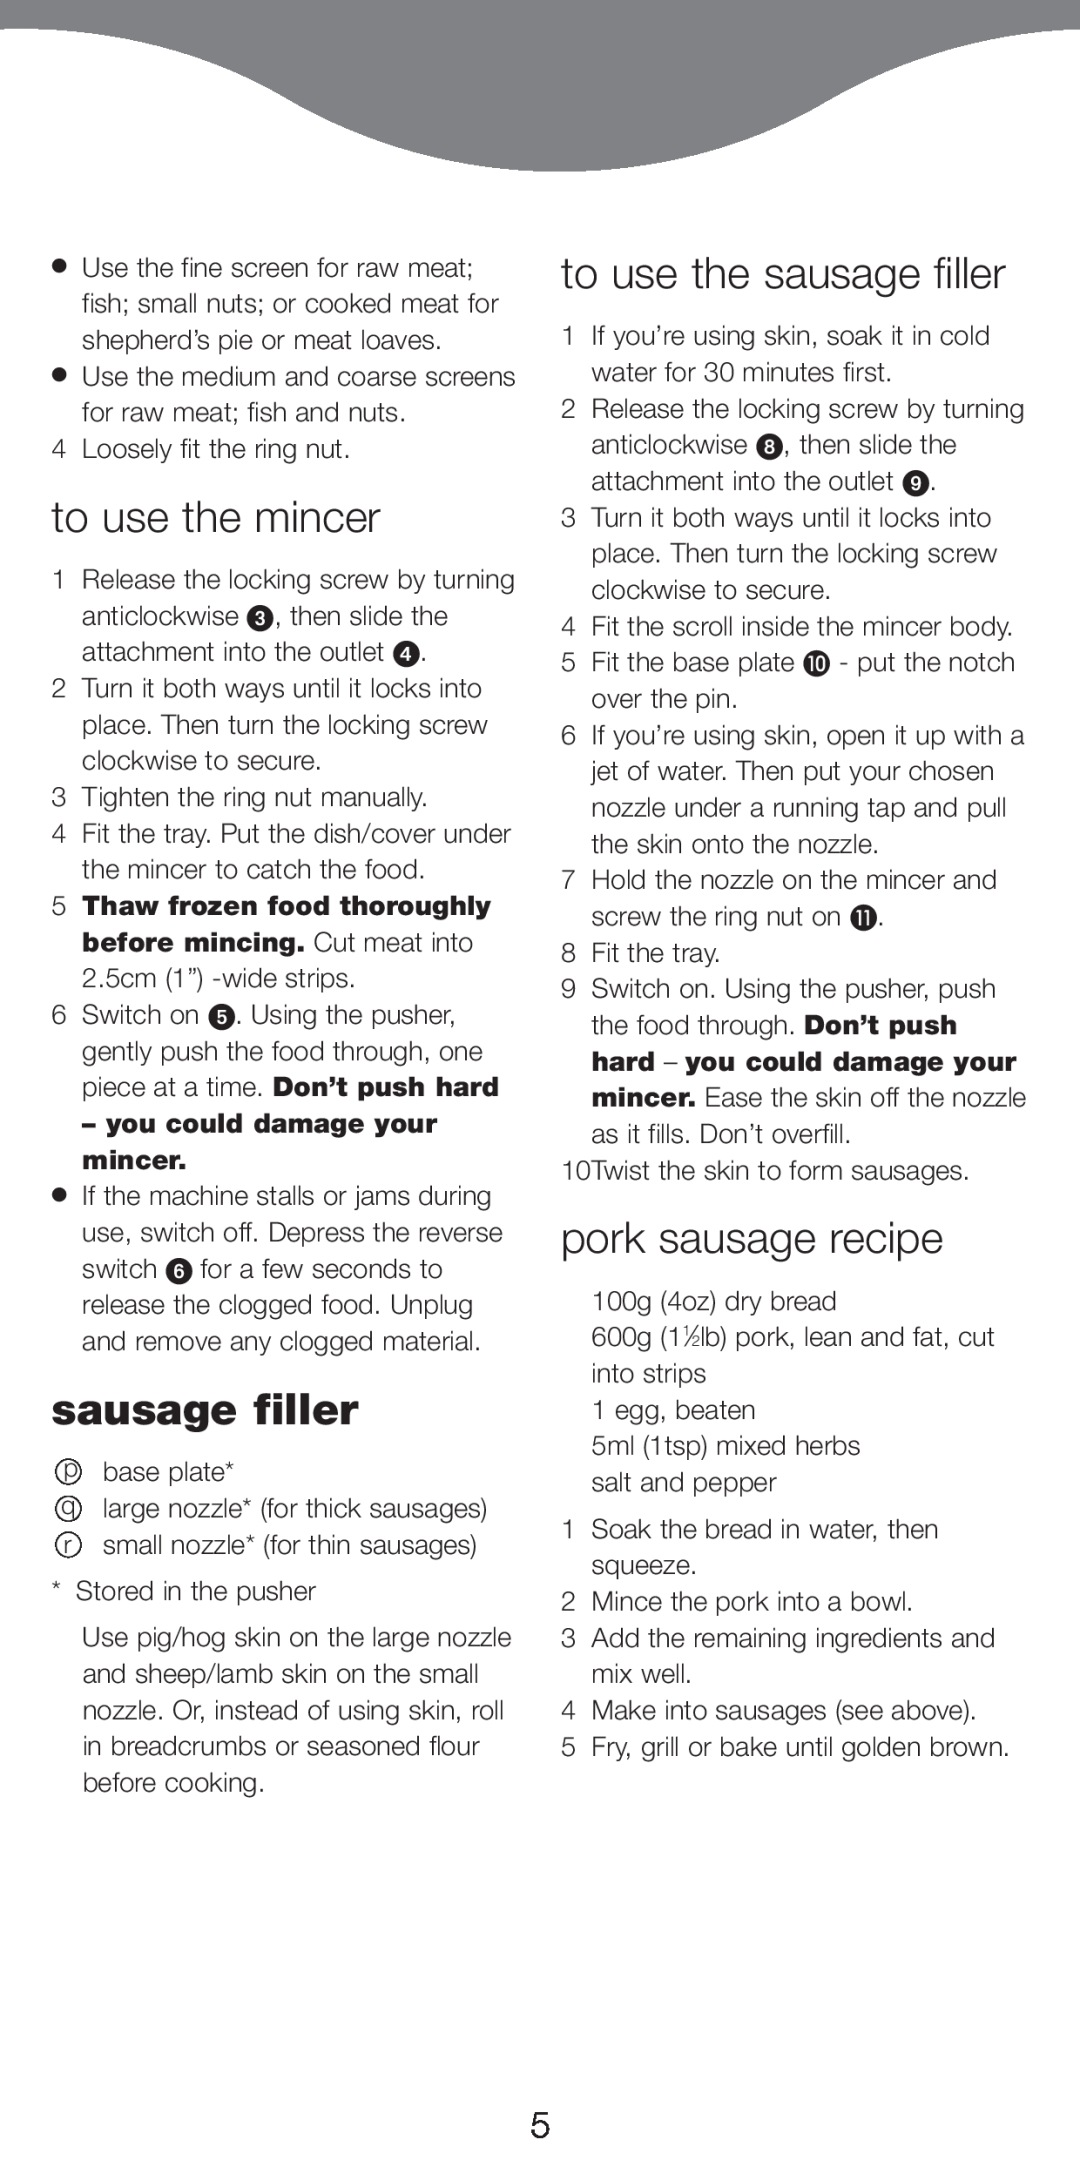 Kenwood MG510 manual to use the mincer, to use the sausage filler, pork sausage recipe, you could damage your mincer 